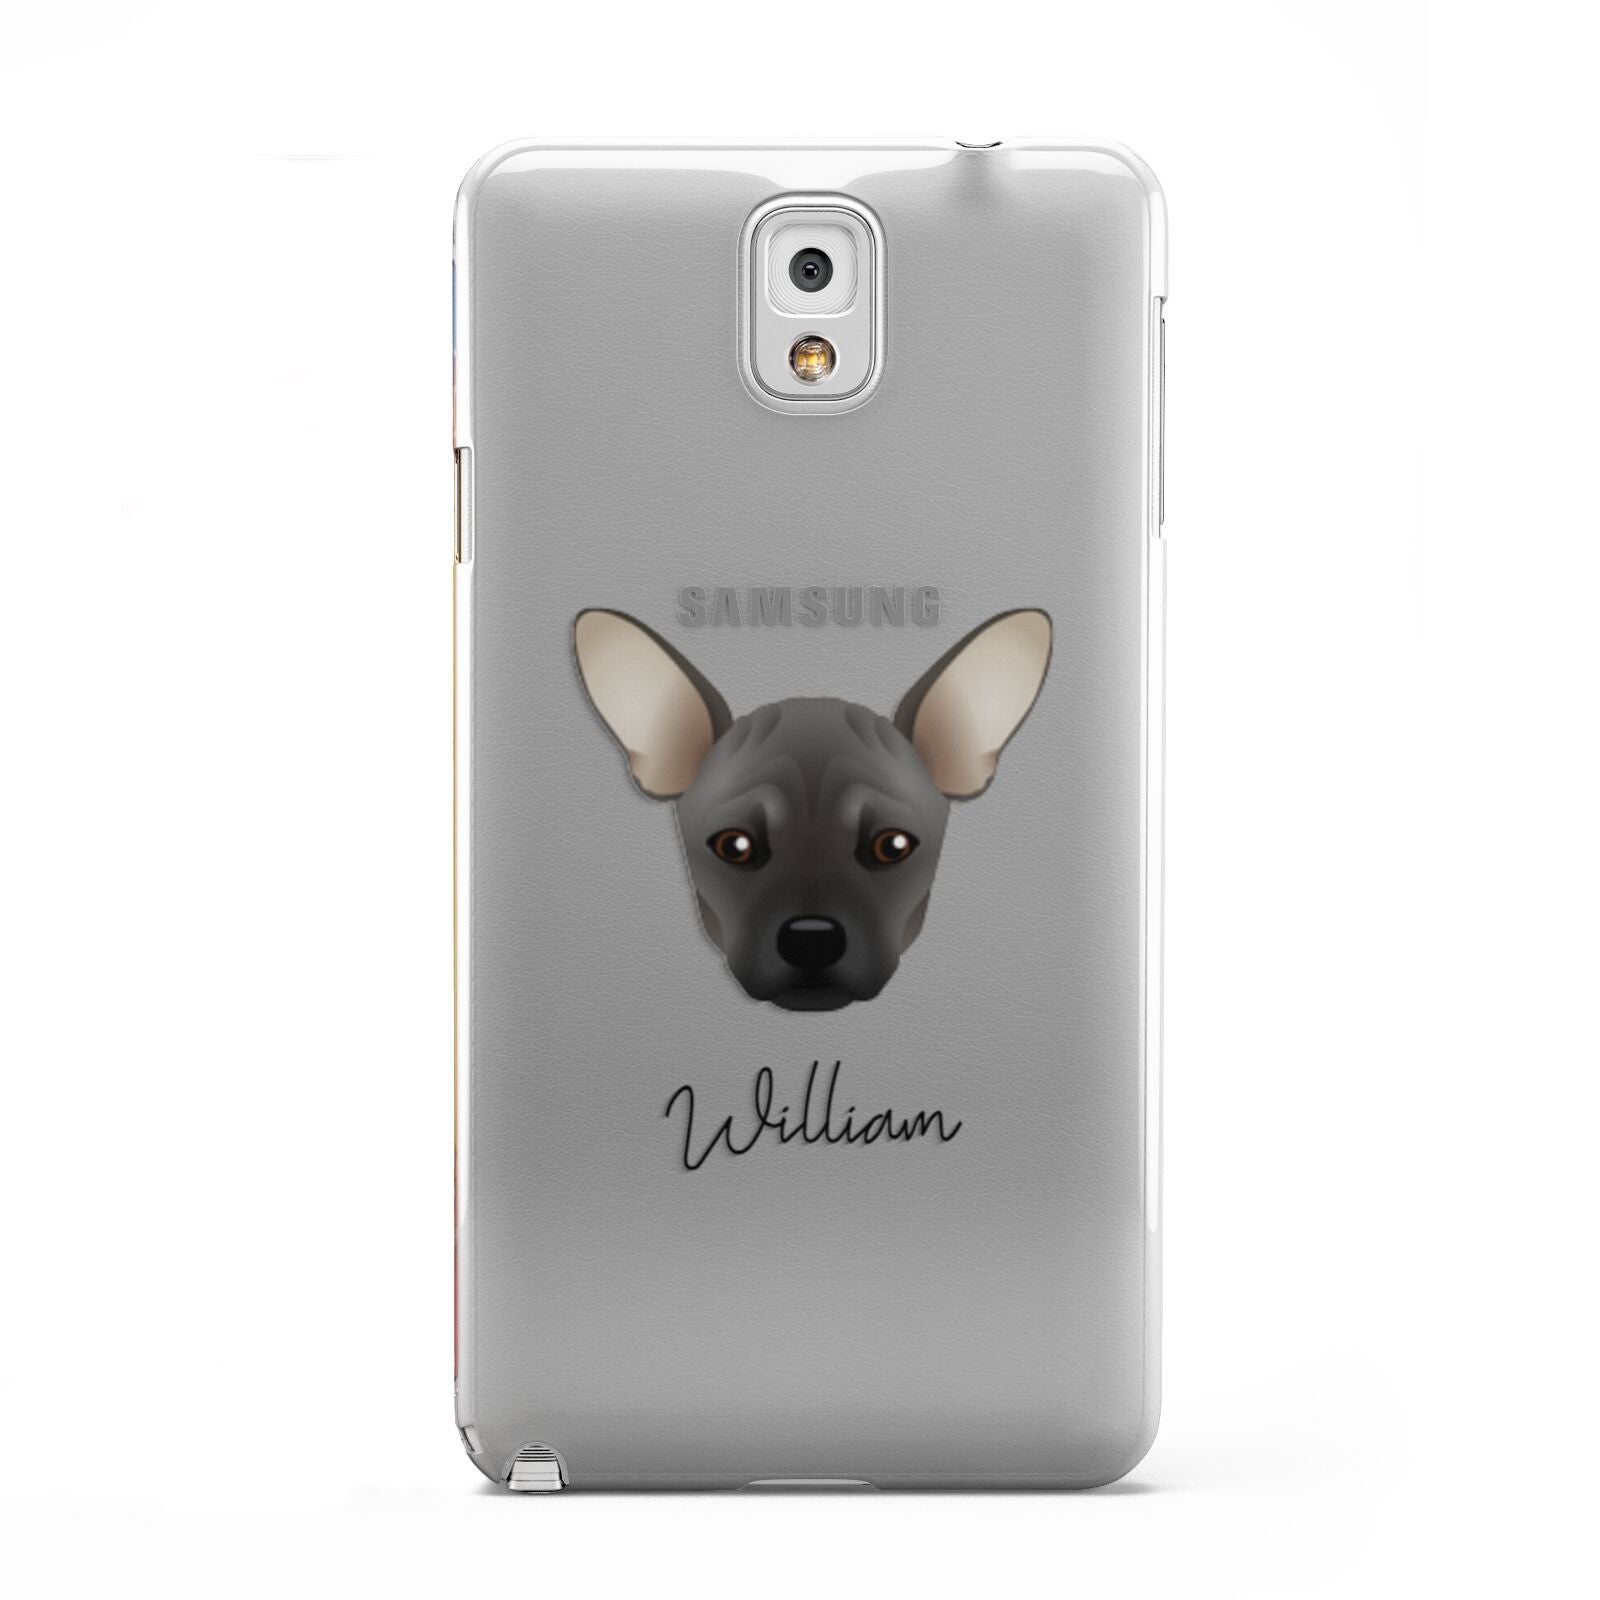 French Pin Personalised Samsung Galaxy Note 3 Case